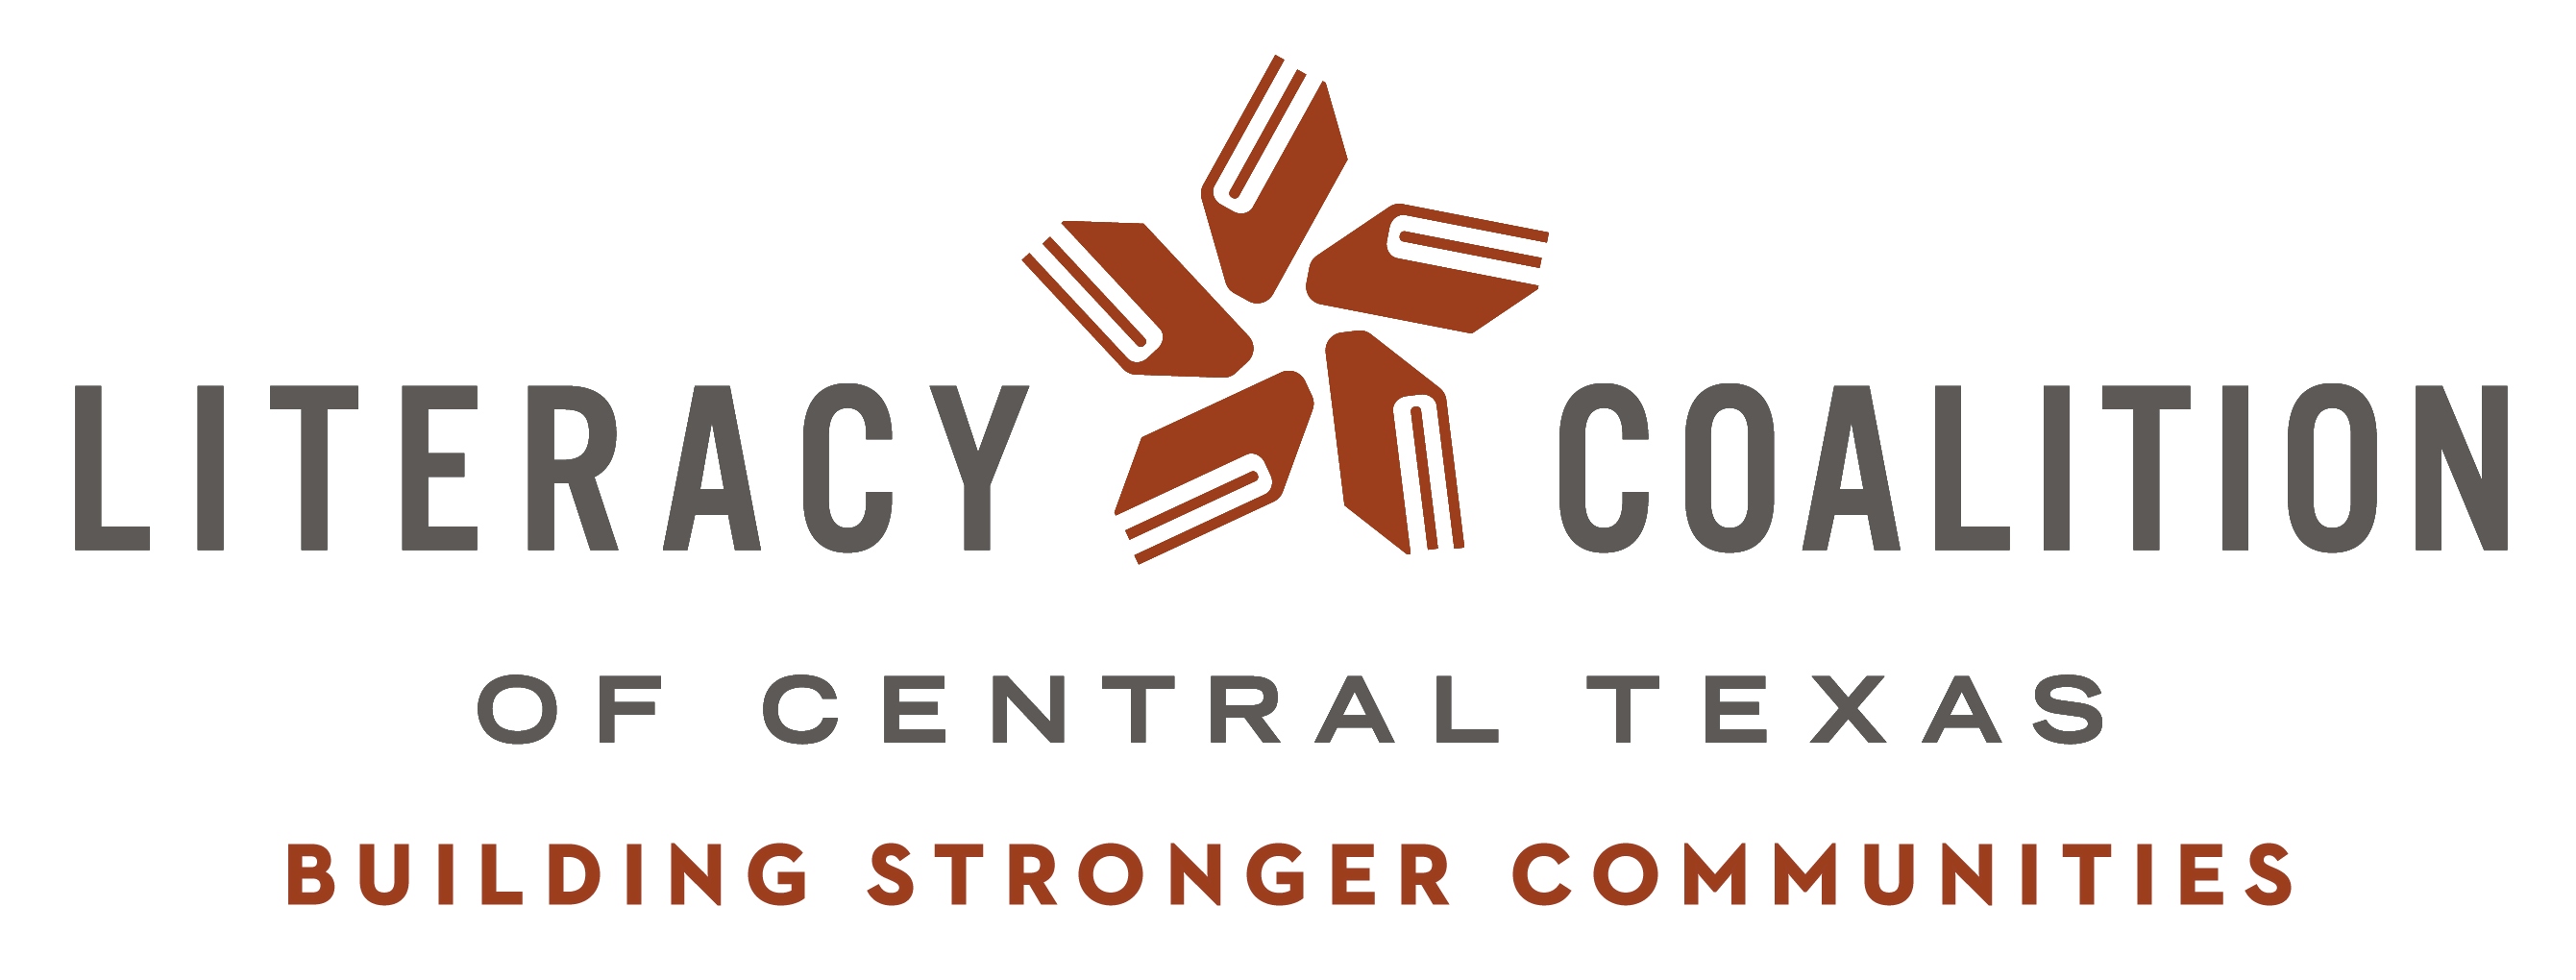 LCCT HiRes logo with tagline   full color